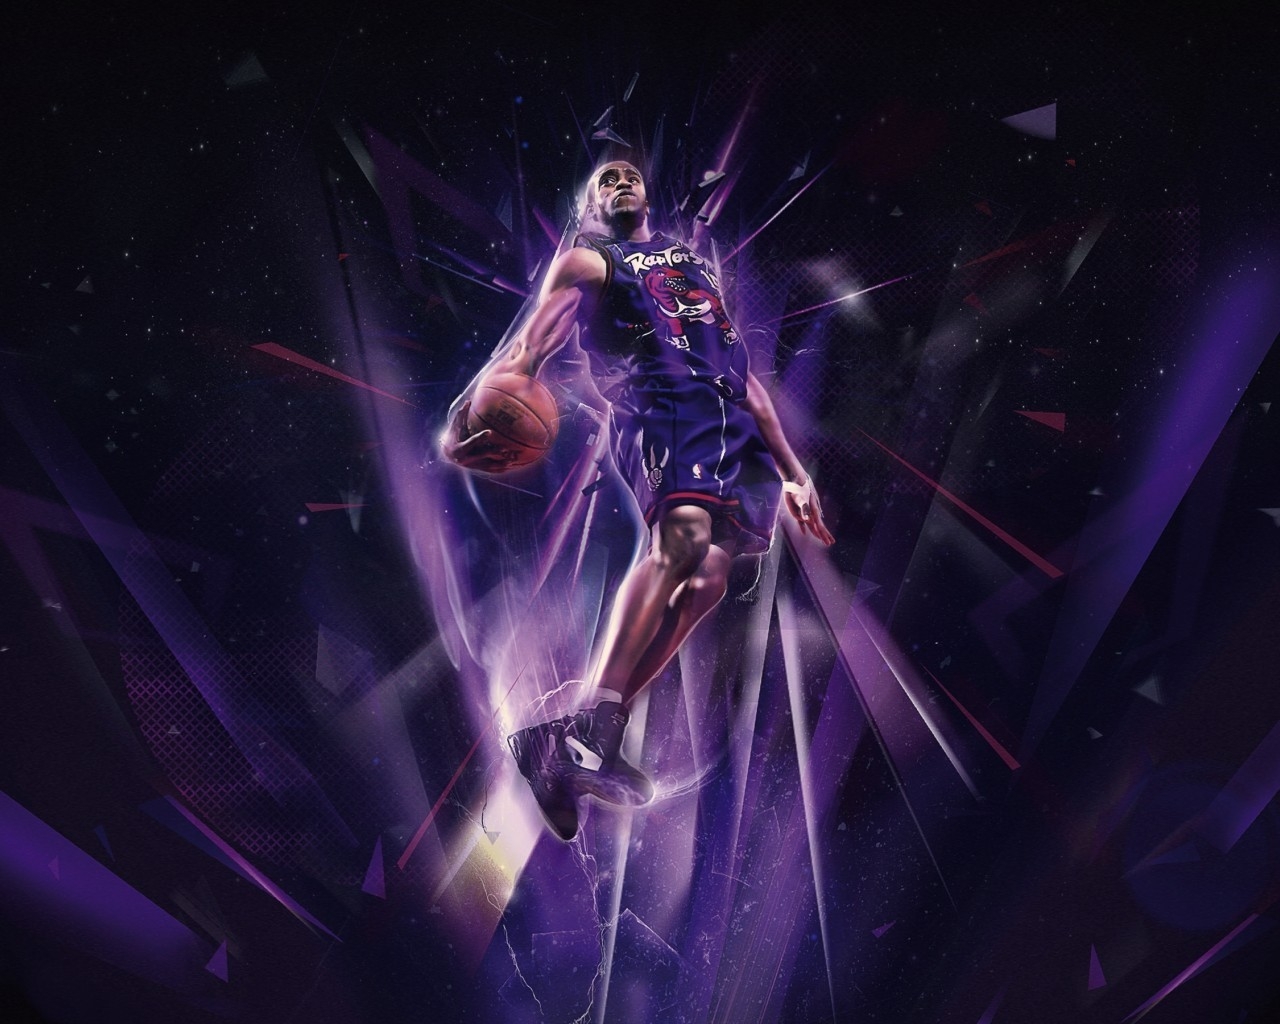 Vince Carter for 1280 x 1024 resolution